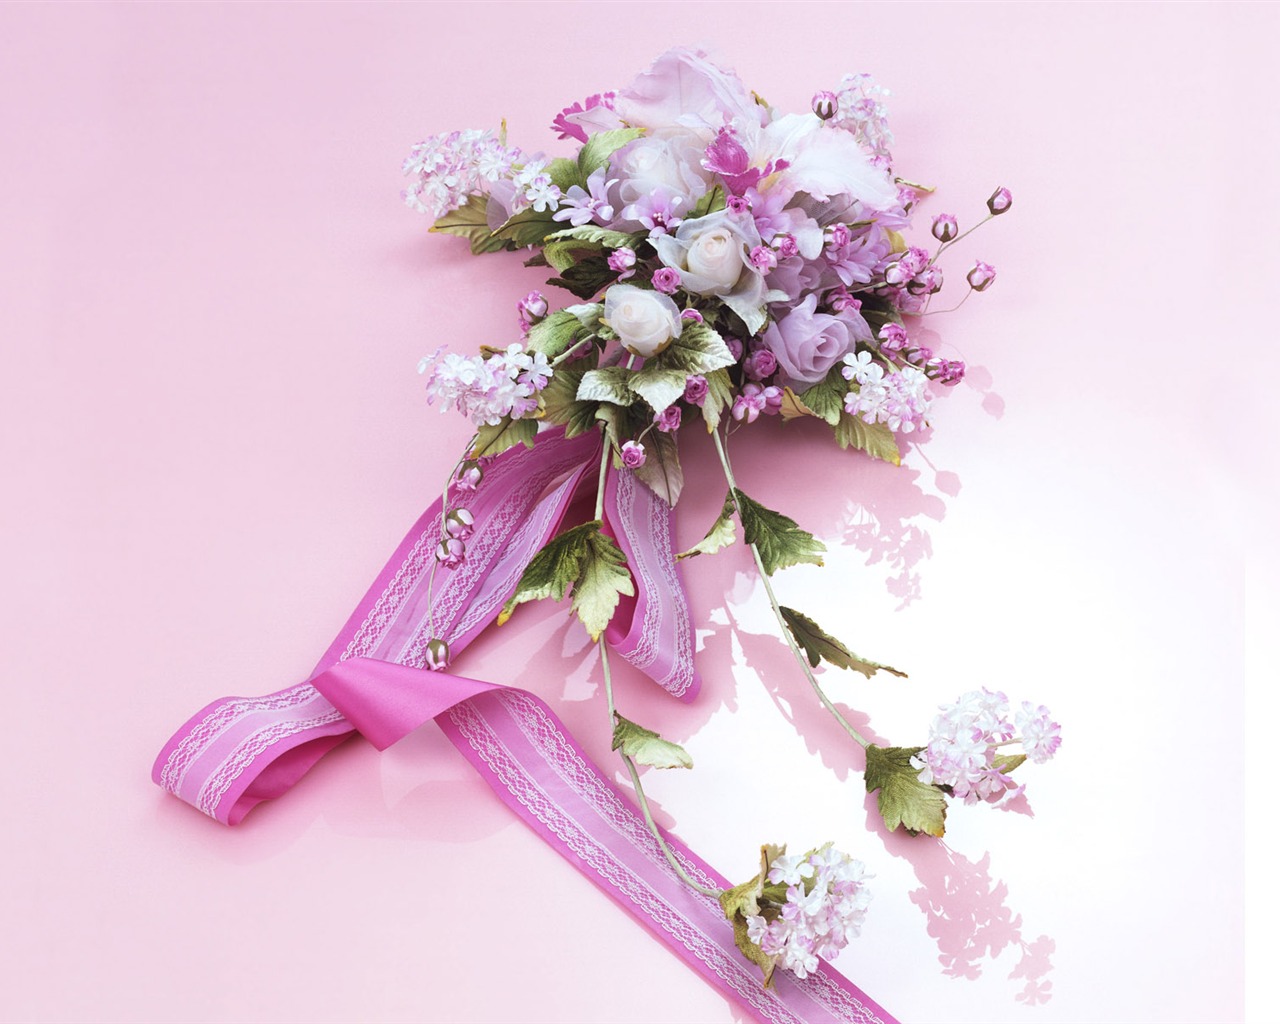 Wedding Flowers items wallpapers (2) #7 - 1280x1024